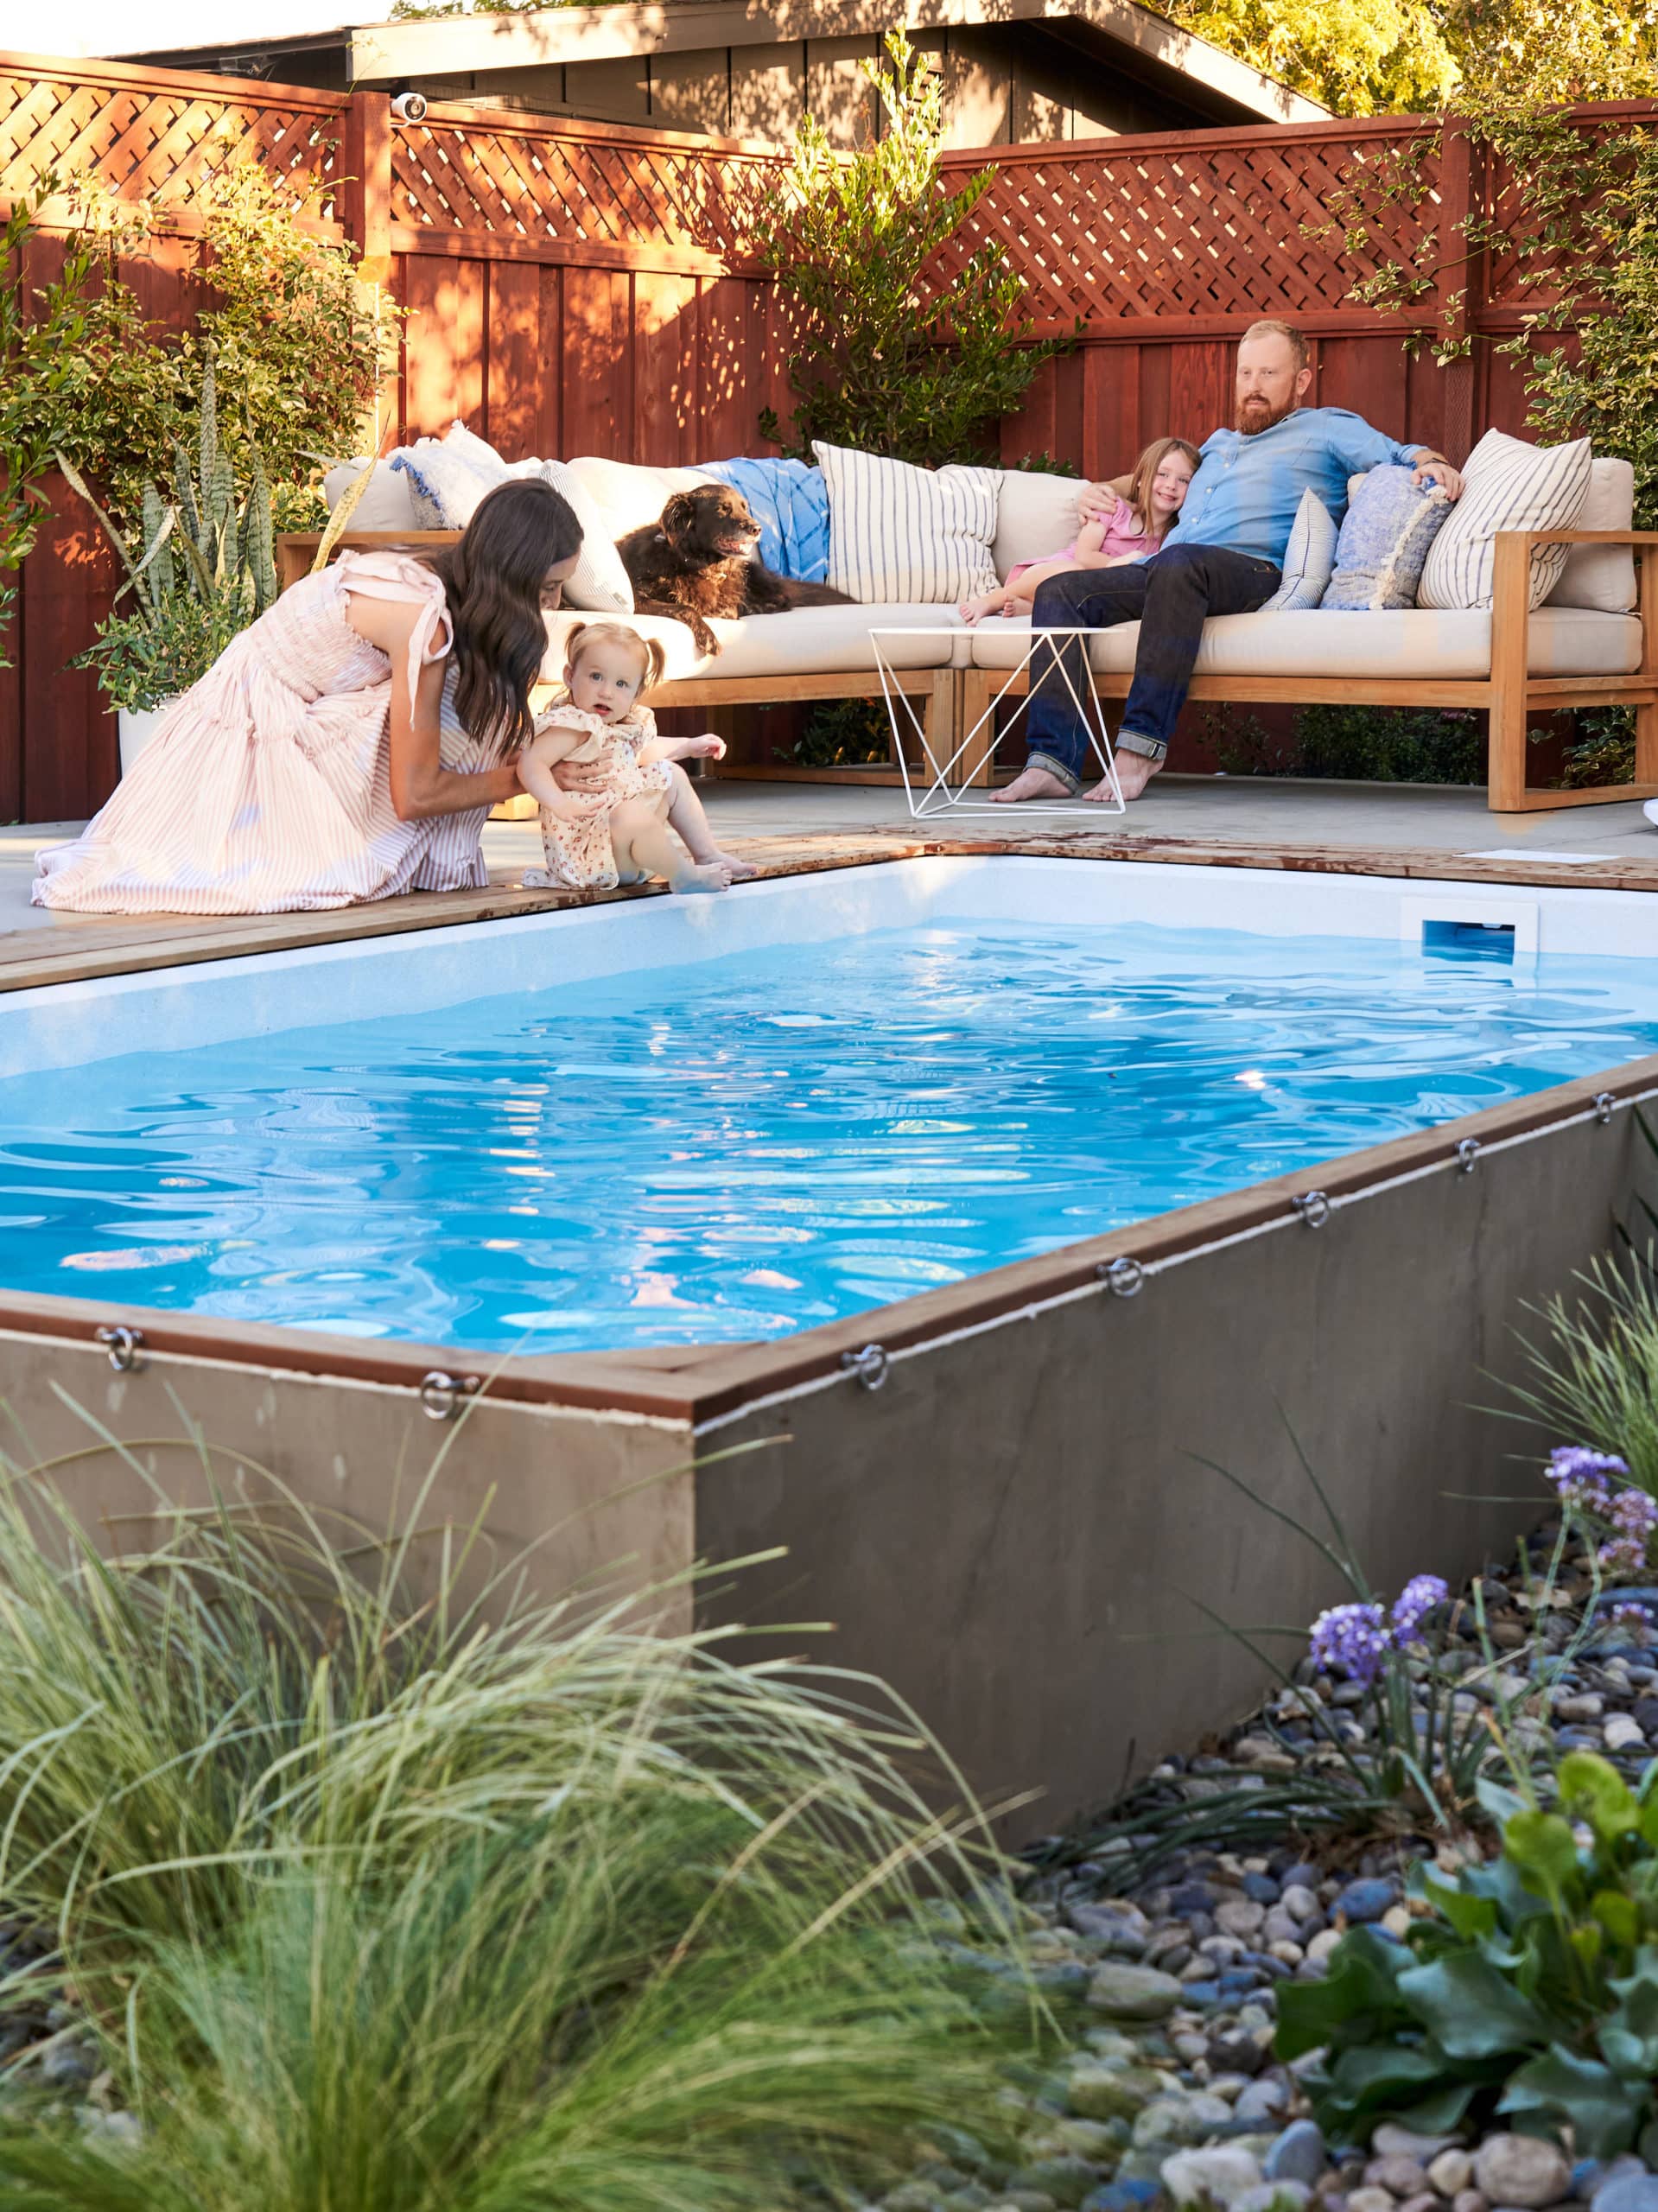 Man and woman with two young children and dog on a concrete patio with sectional around a plunge pool.